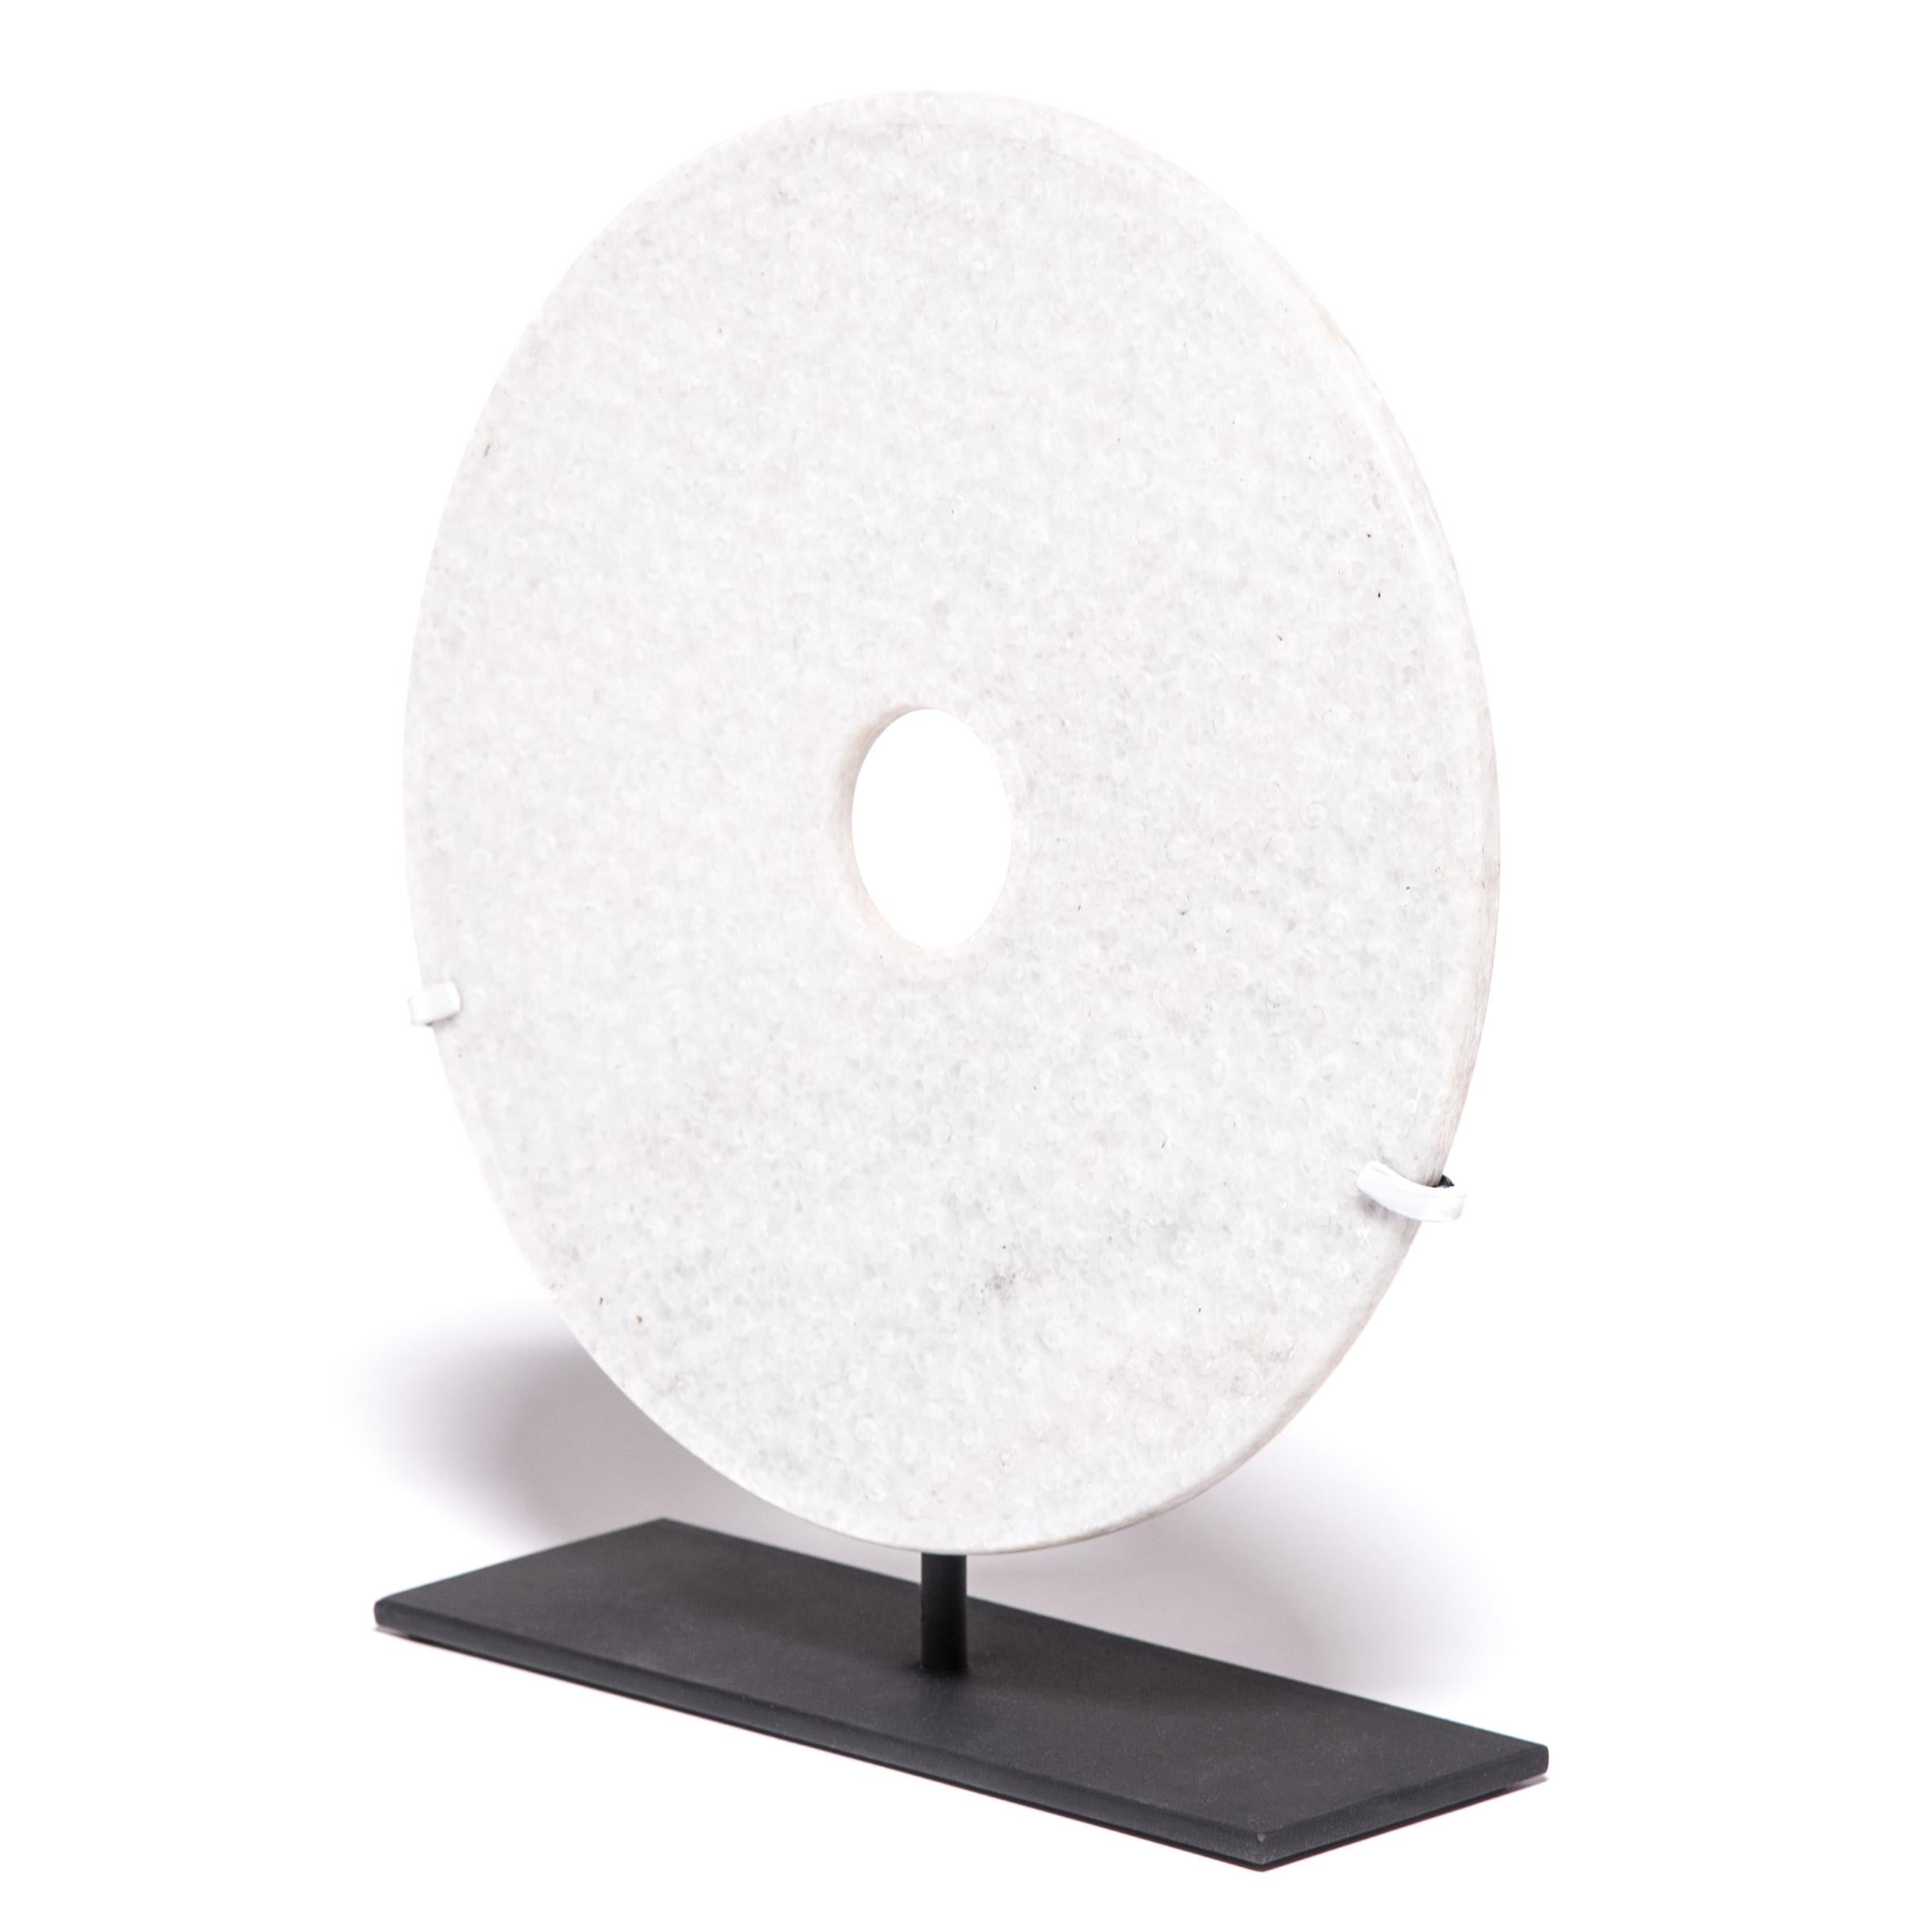 With its speckled cream color and perfectly round form, this white hardstone disc has a certain celestial quality, like a full moon gleaming in the night sky. Known as “bi,” these round discs with a circular hole in the center date all the way back